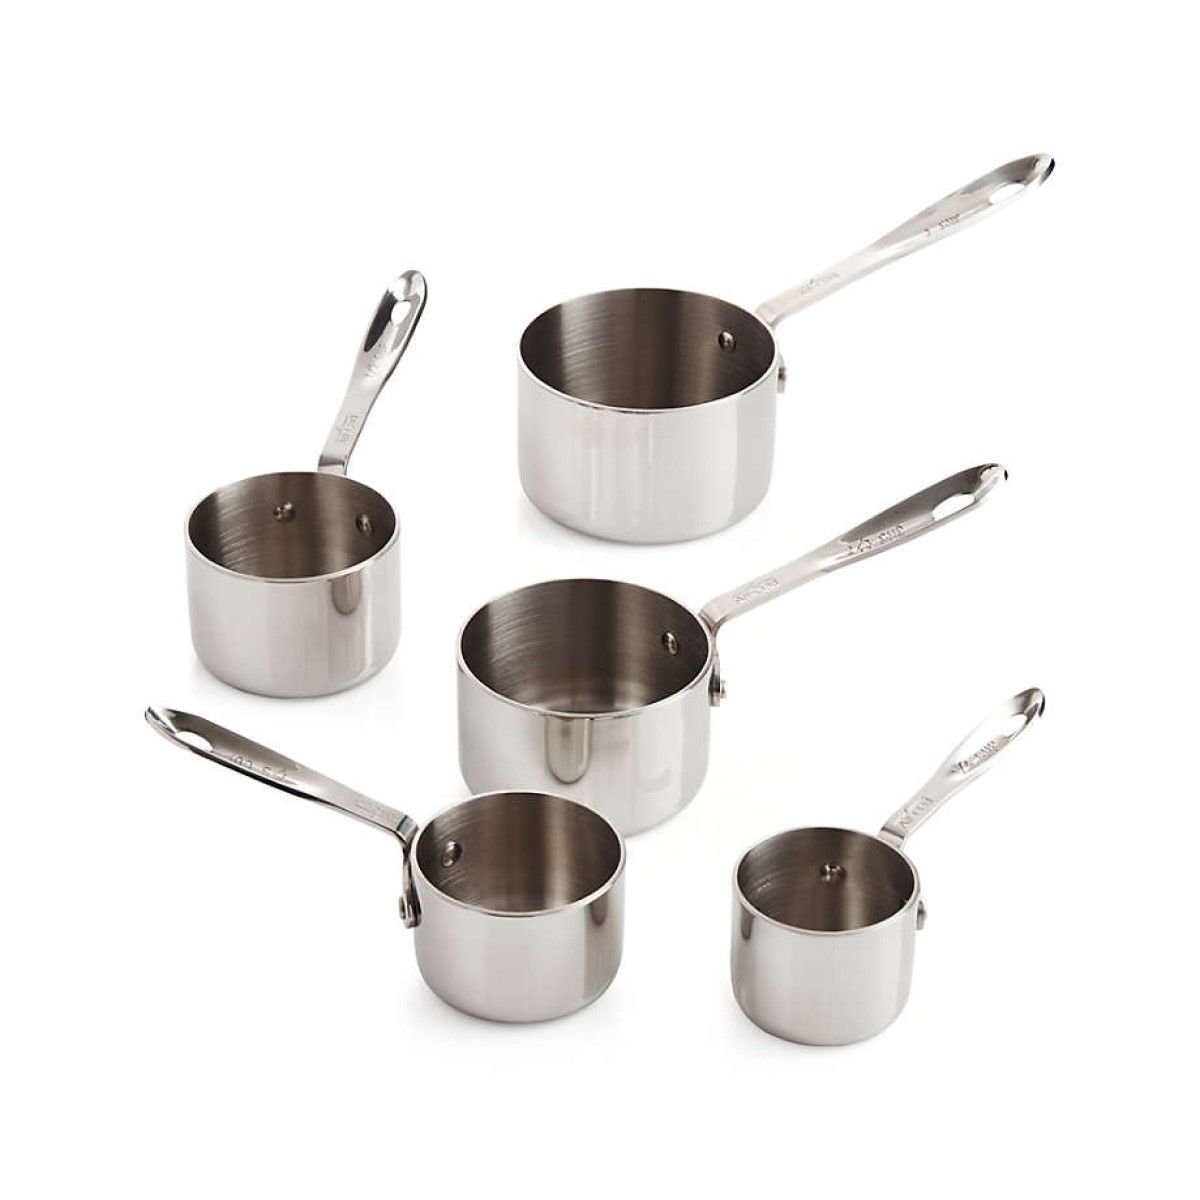  All-Clad Kitchen Accessories Stainless Steel Measuring